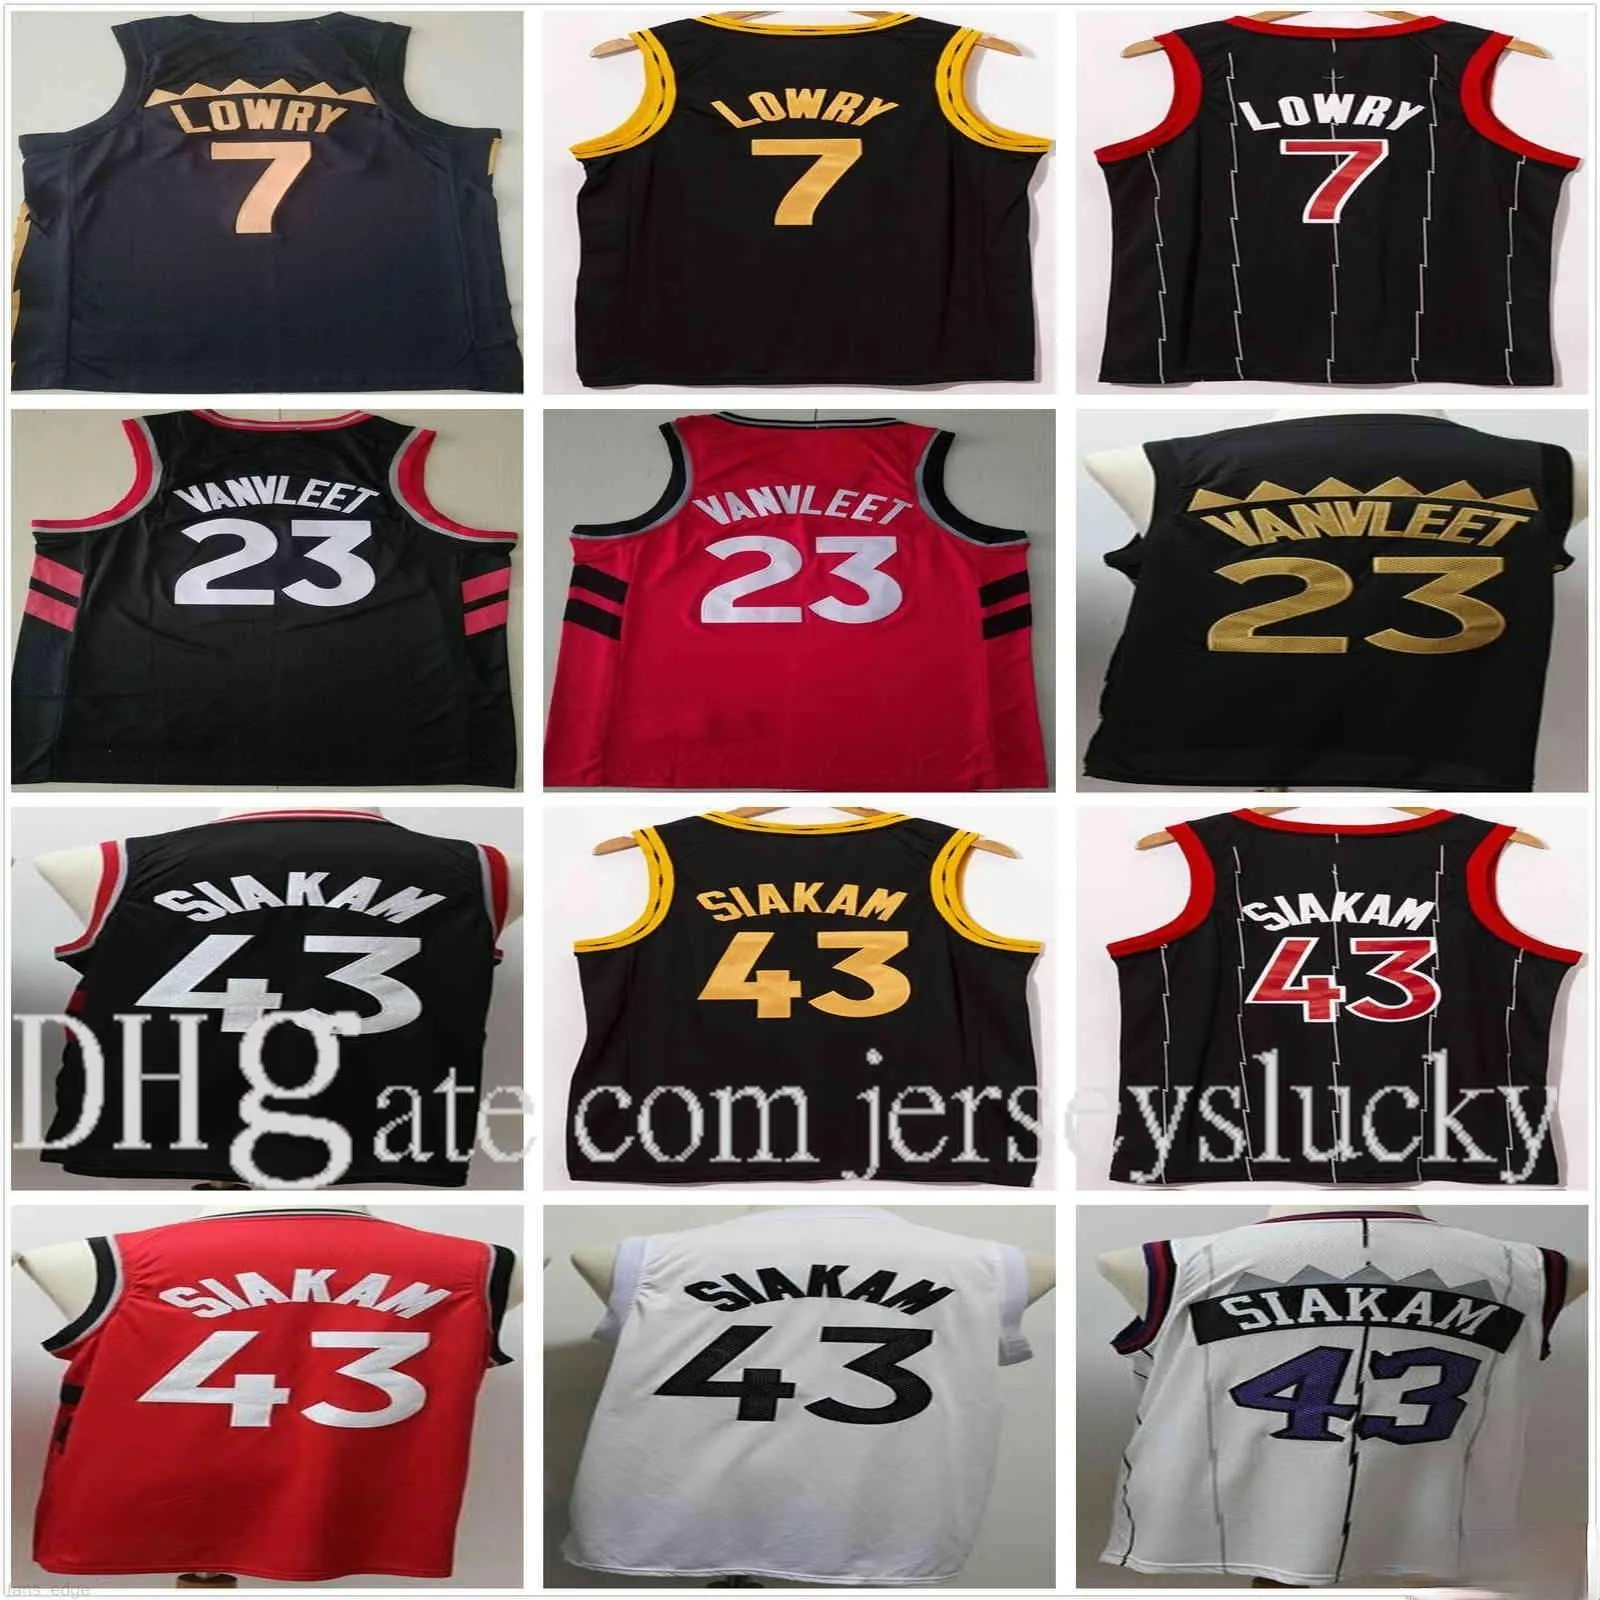 NCAA College Pascal 7 Lowry Fred 43 Siakam Jersey Kyle 23 VanVleet Rouge Blanc Noir Rétro Vintage Gros Pas Cher Hommes Basketball Maillots